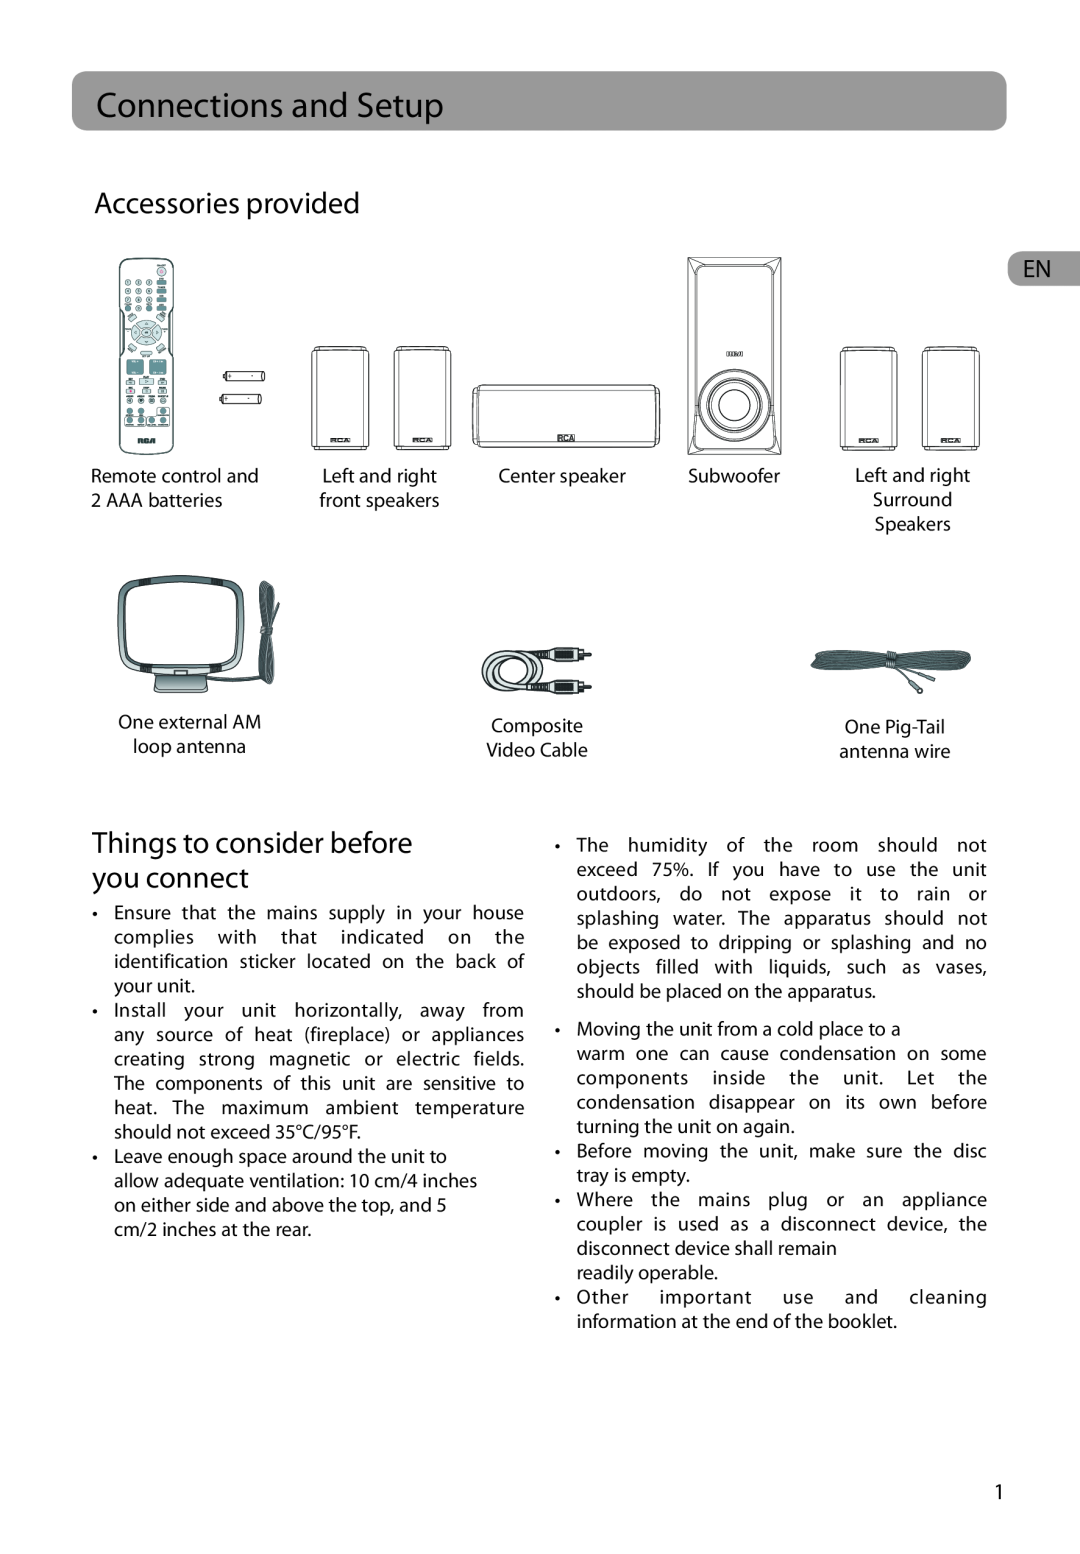 RCA RTD317 user manual Connections and Setup, Accessories provided, Things to consider before you connect 